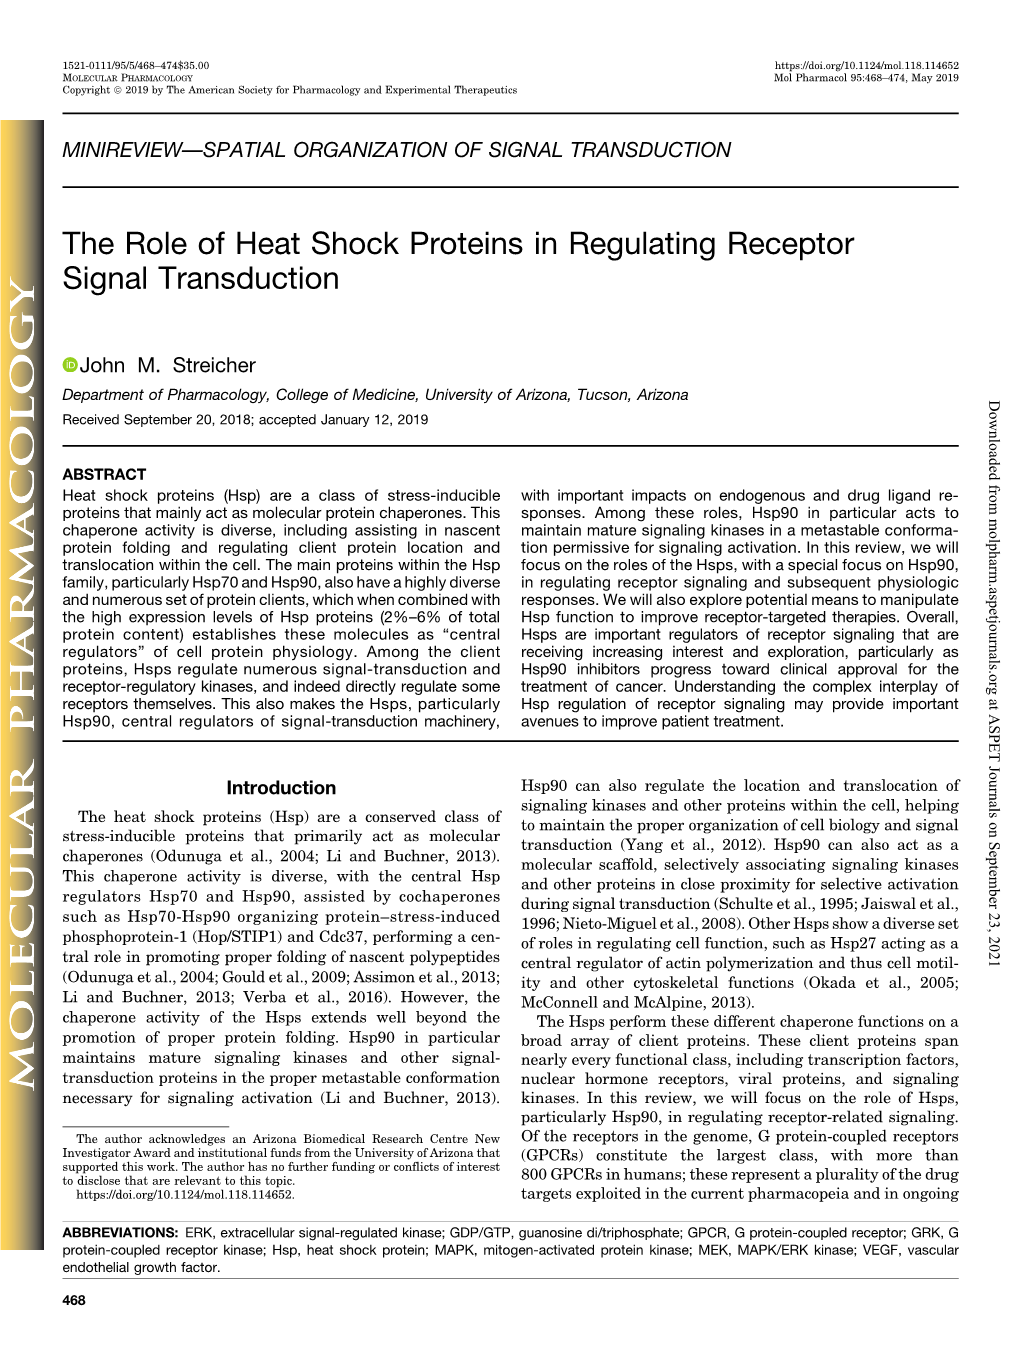 The Role of Heat Shock Proteins in Regulating Receptor Signal Transduction